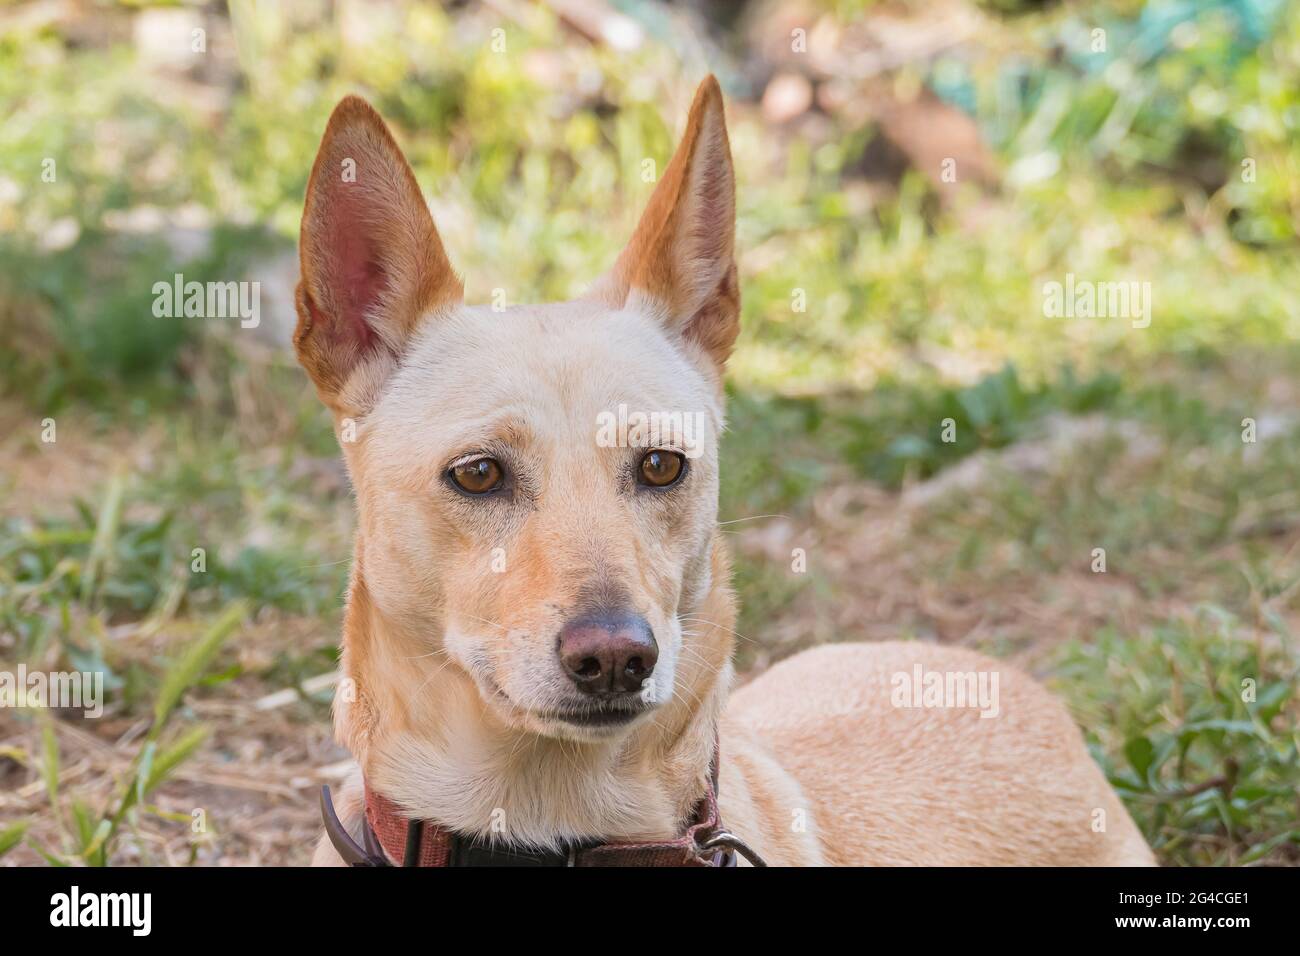 sand-colored Spanish podenco dog head with collar outdoors Stock Photo